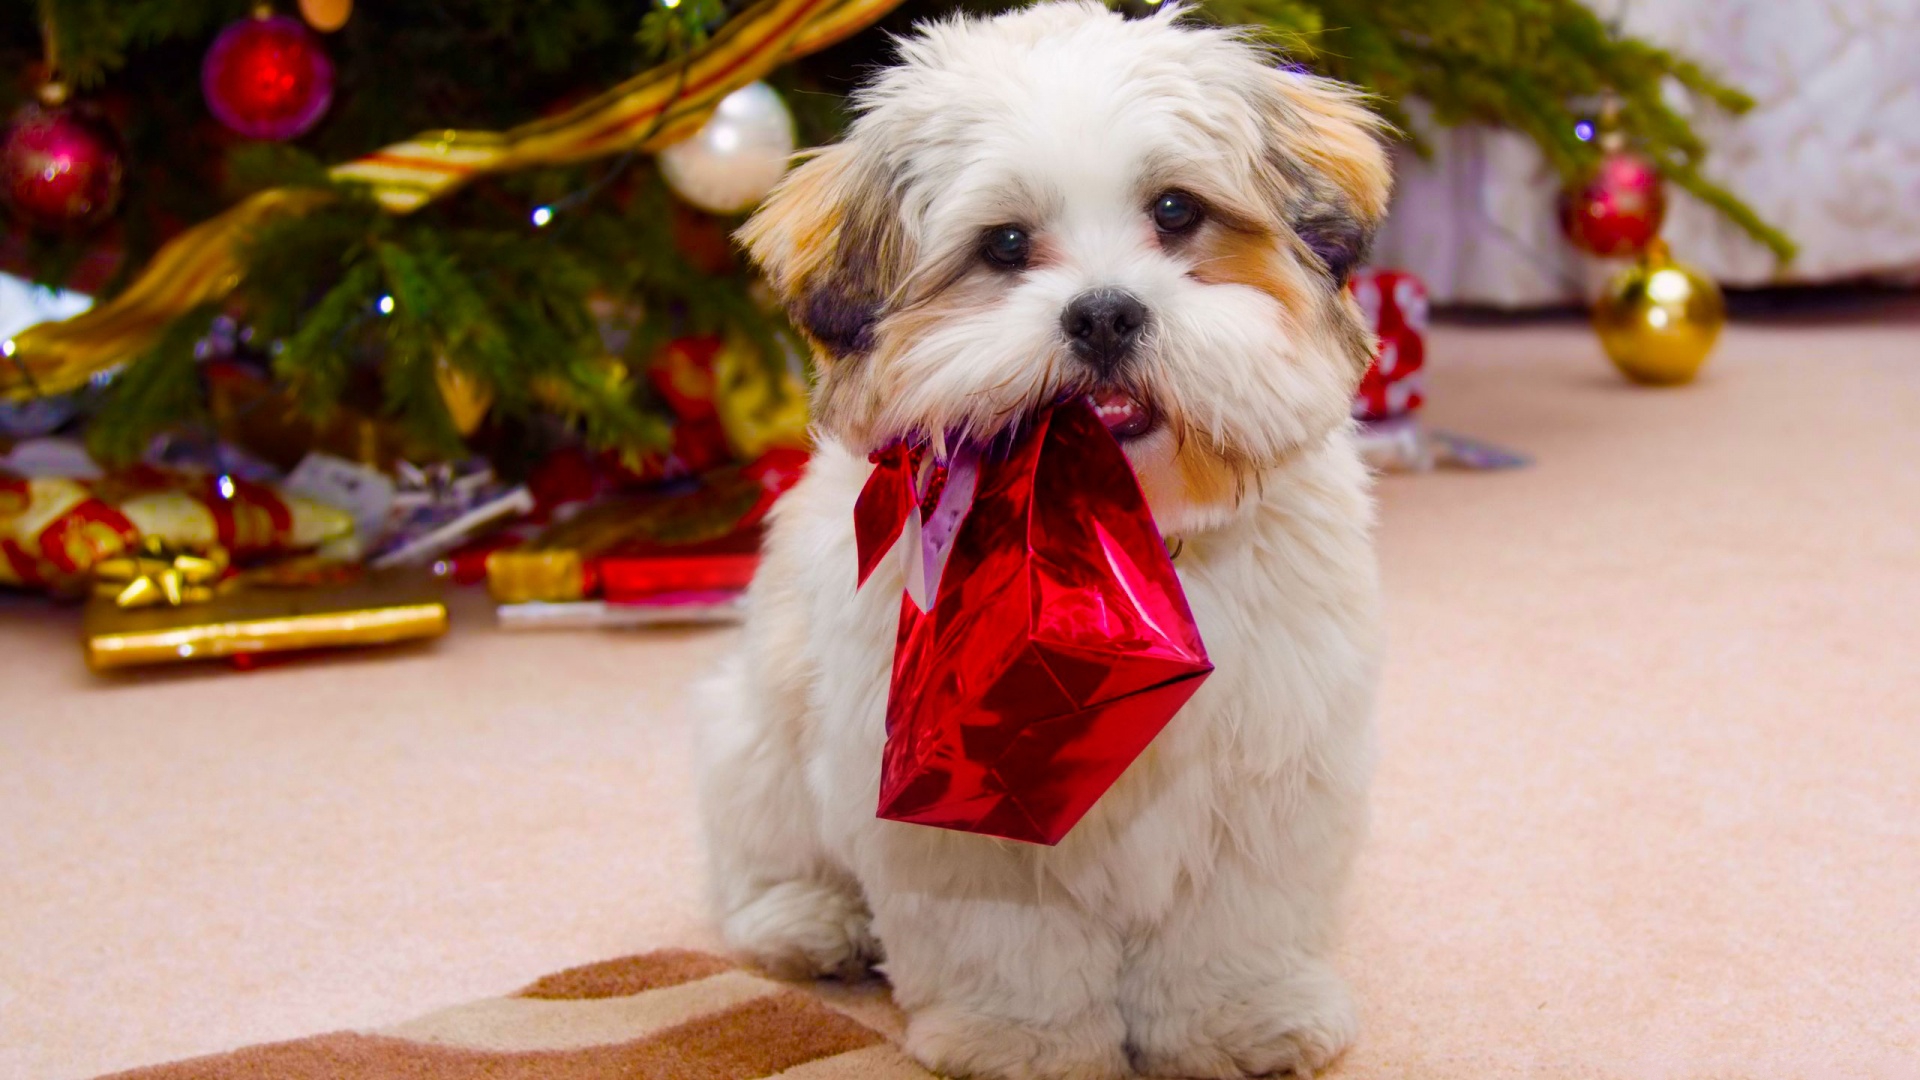 104788 Puppy Christmas Images Stock Photos  Vectors  Shutterstock